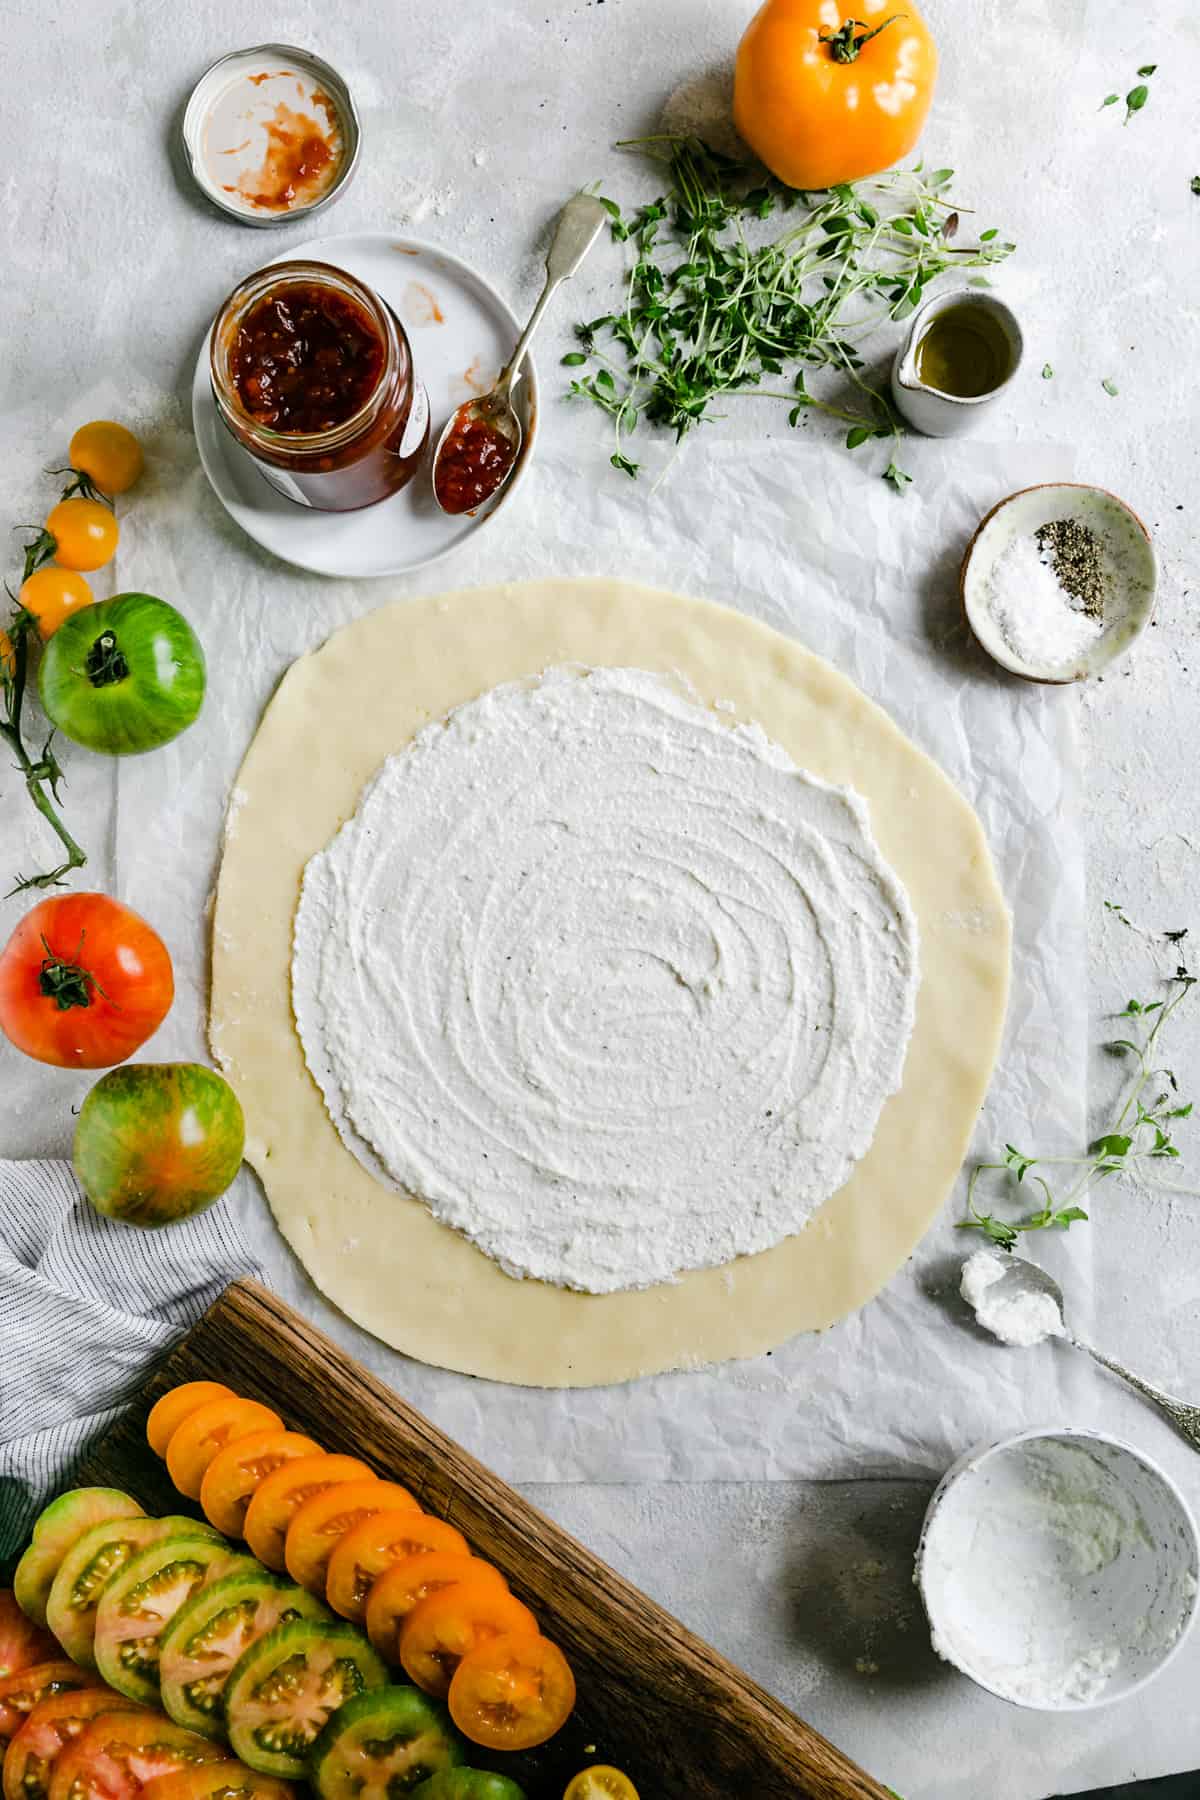 top view of a shortcrust pastry rolled into a circle and topped with ricotta cheese